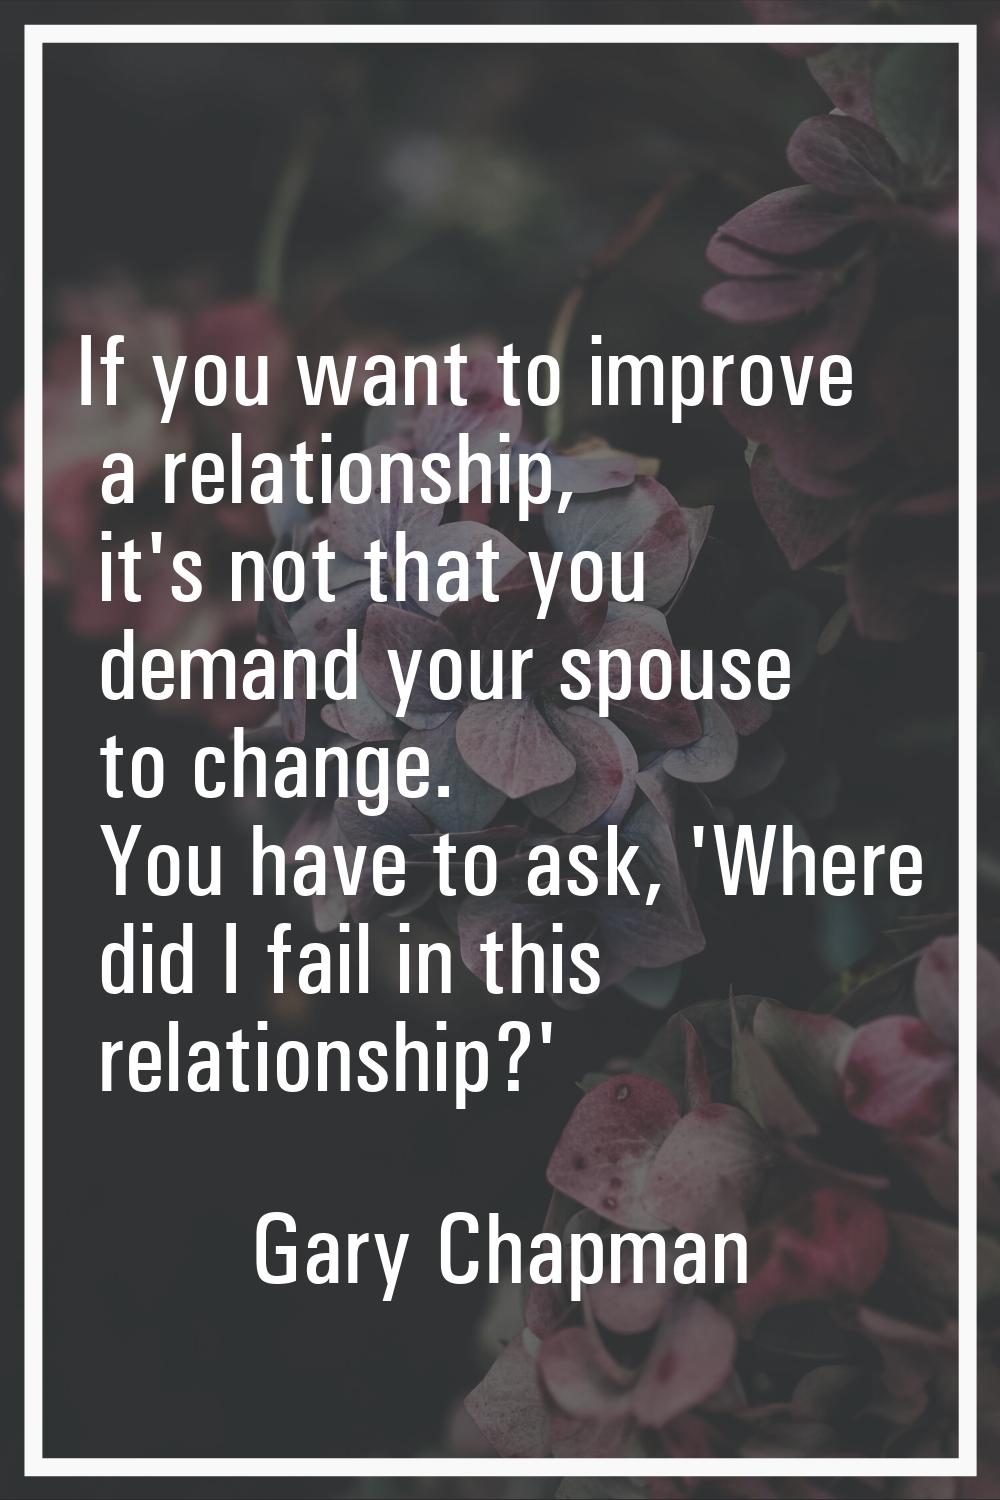 If you want to improve a relationship, it's not that you demand your spouse to change. You have to 